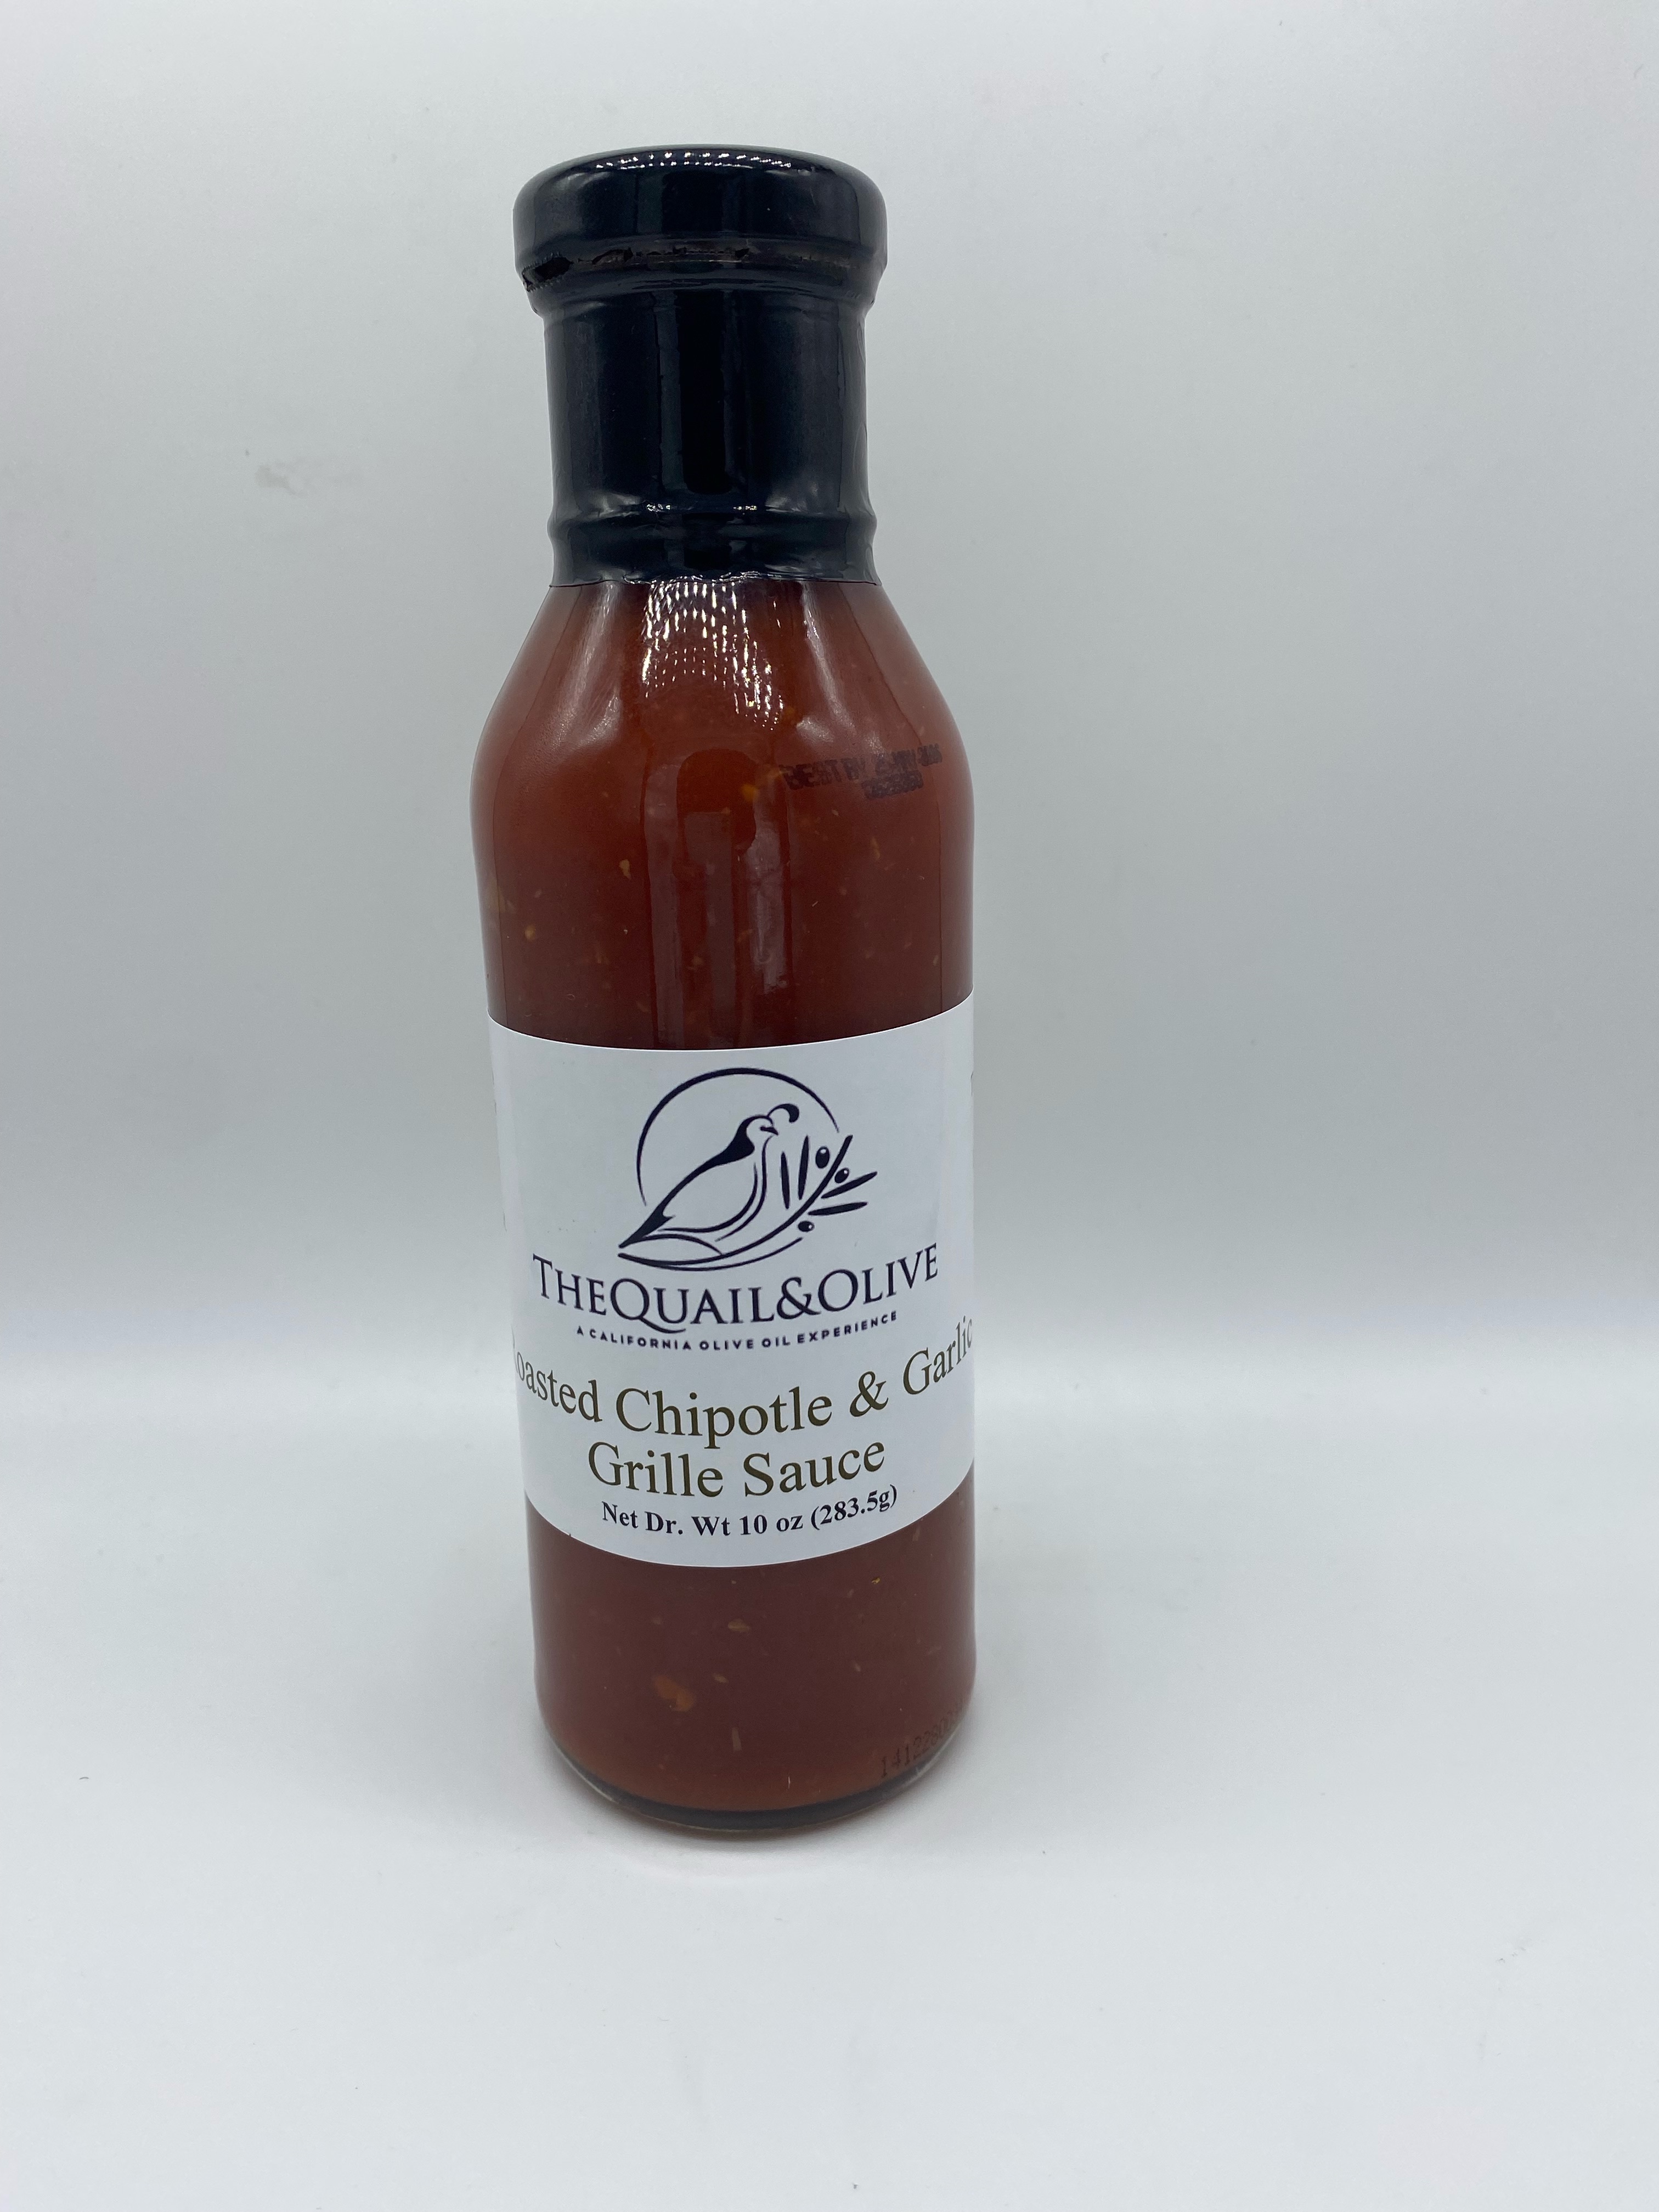 Product Image for Roasted Chipotle & Garlic Grille Sauce